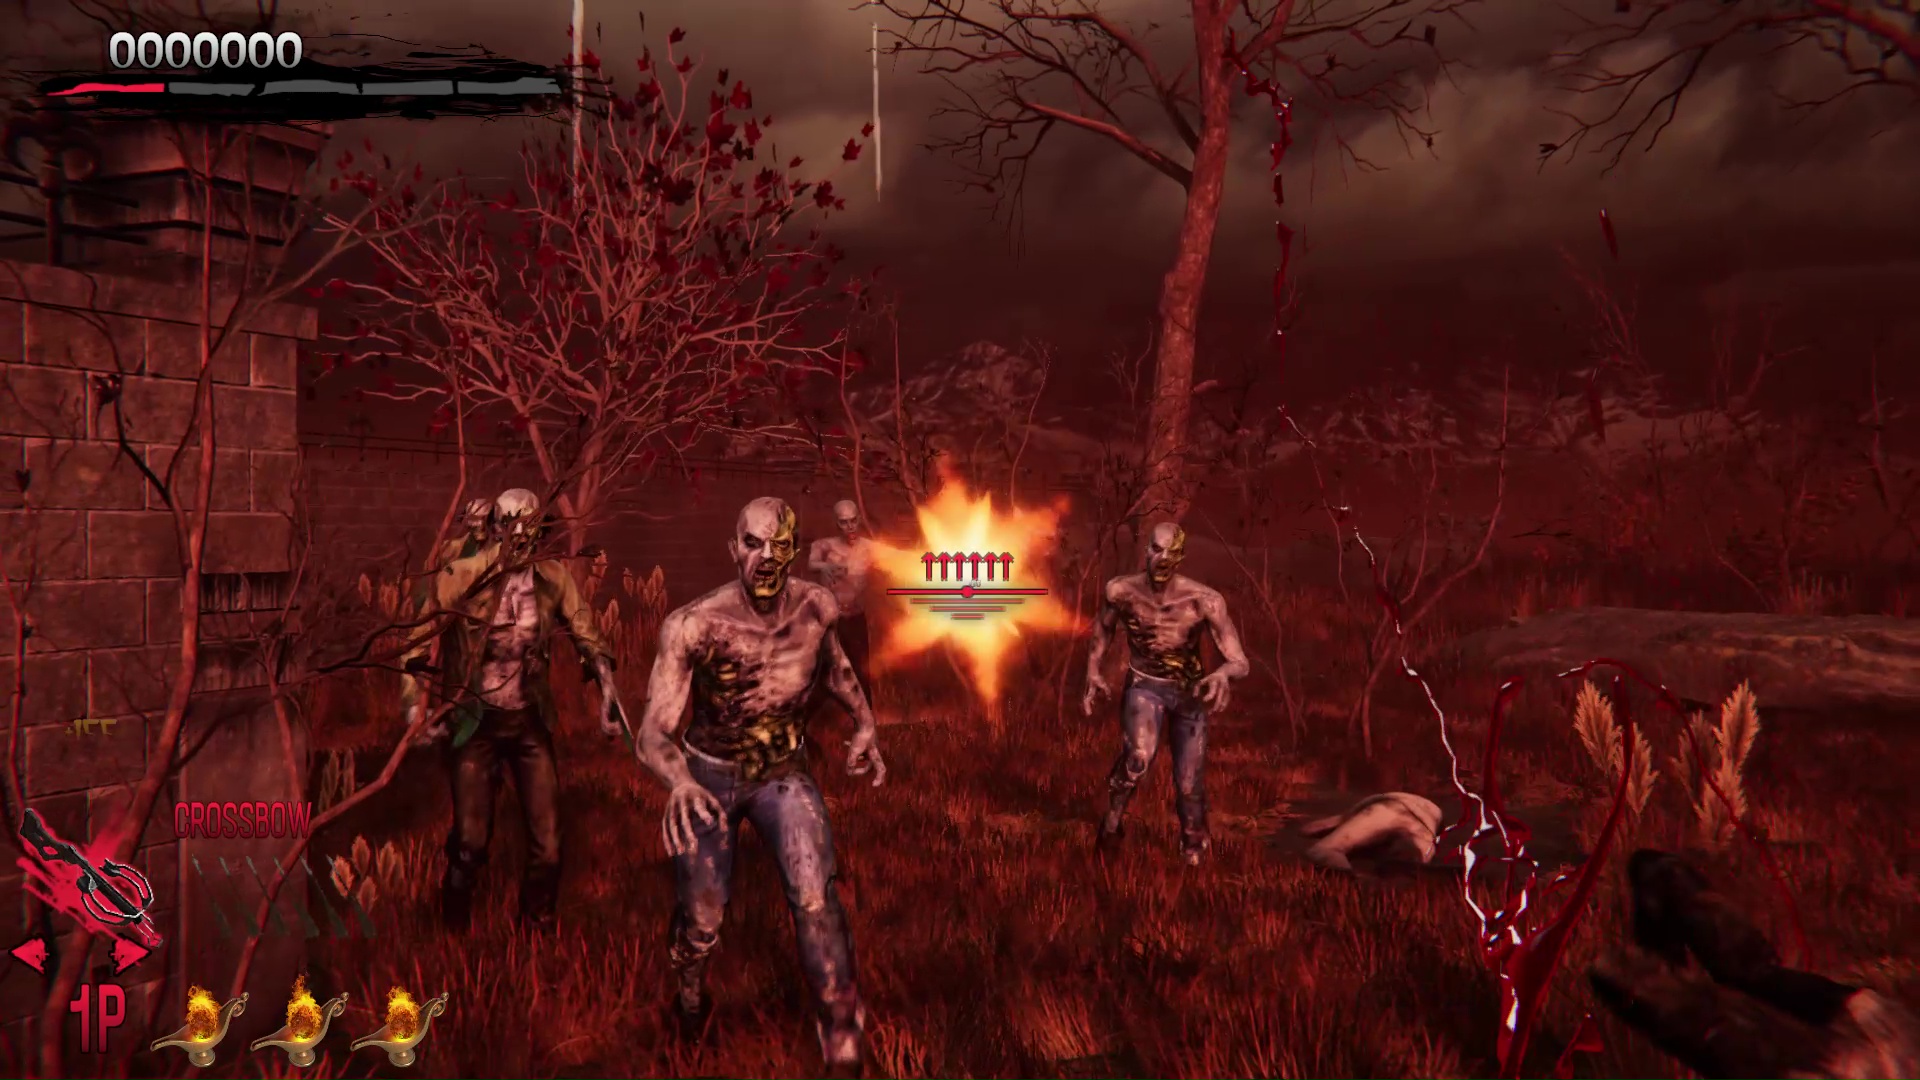 THE HOUSE OF THE DEAD: Remake System Requirements - Can I Run It